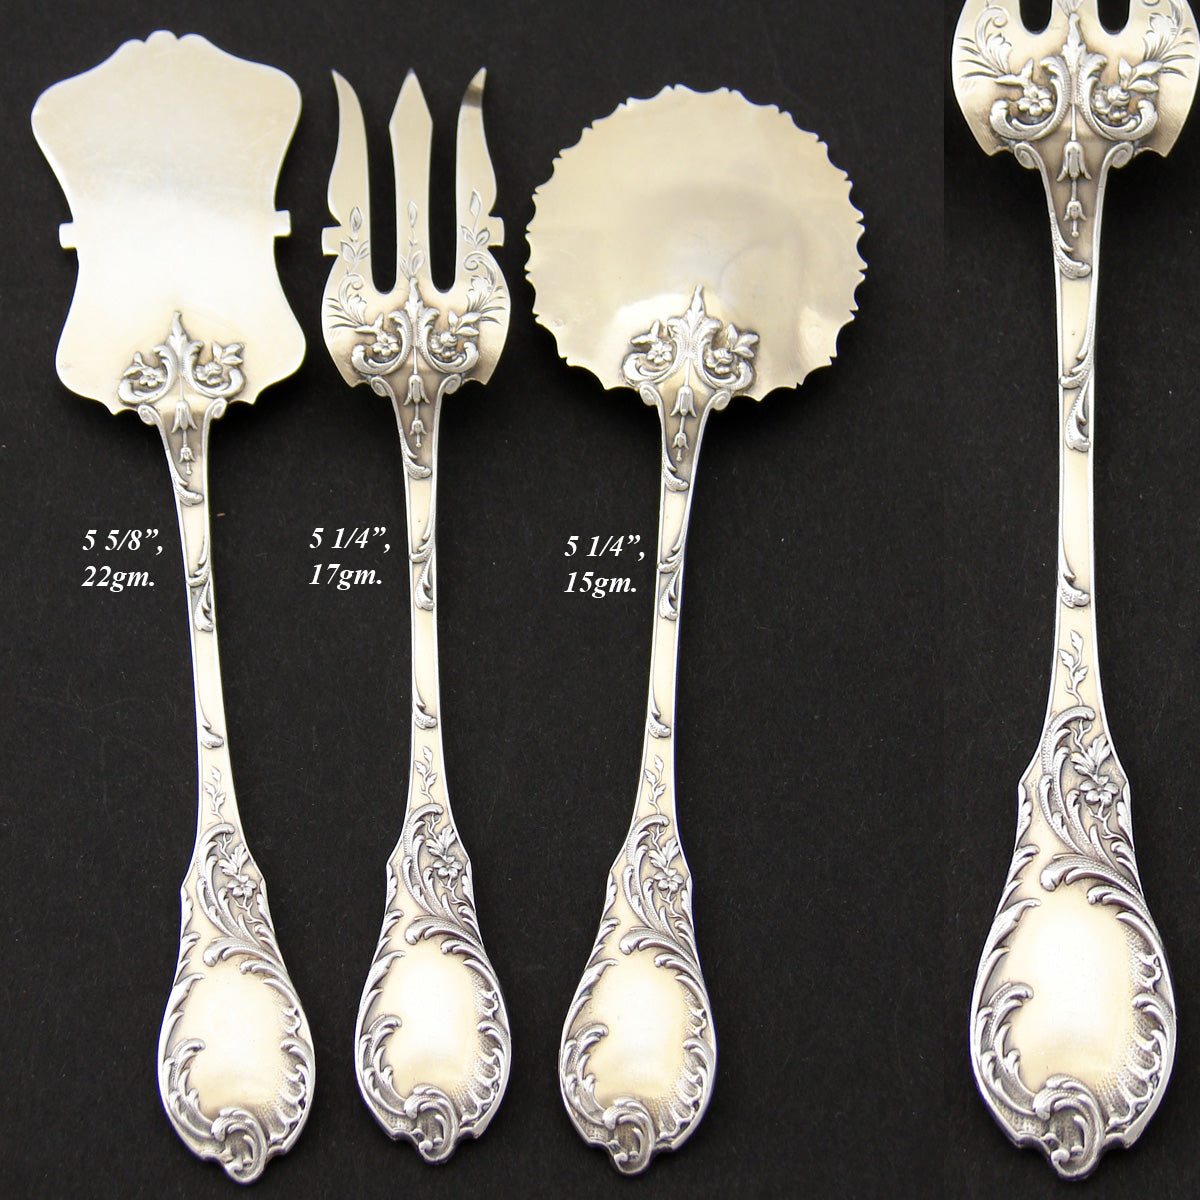 Antique French Vermeil Gold on Silver 3pc Hors d'Oeuvre Serving Set, Rococo Pattern